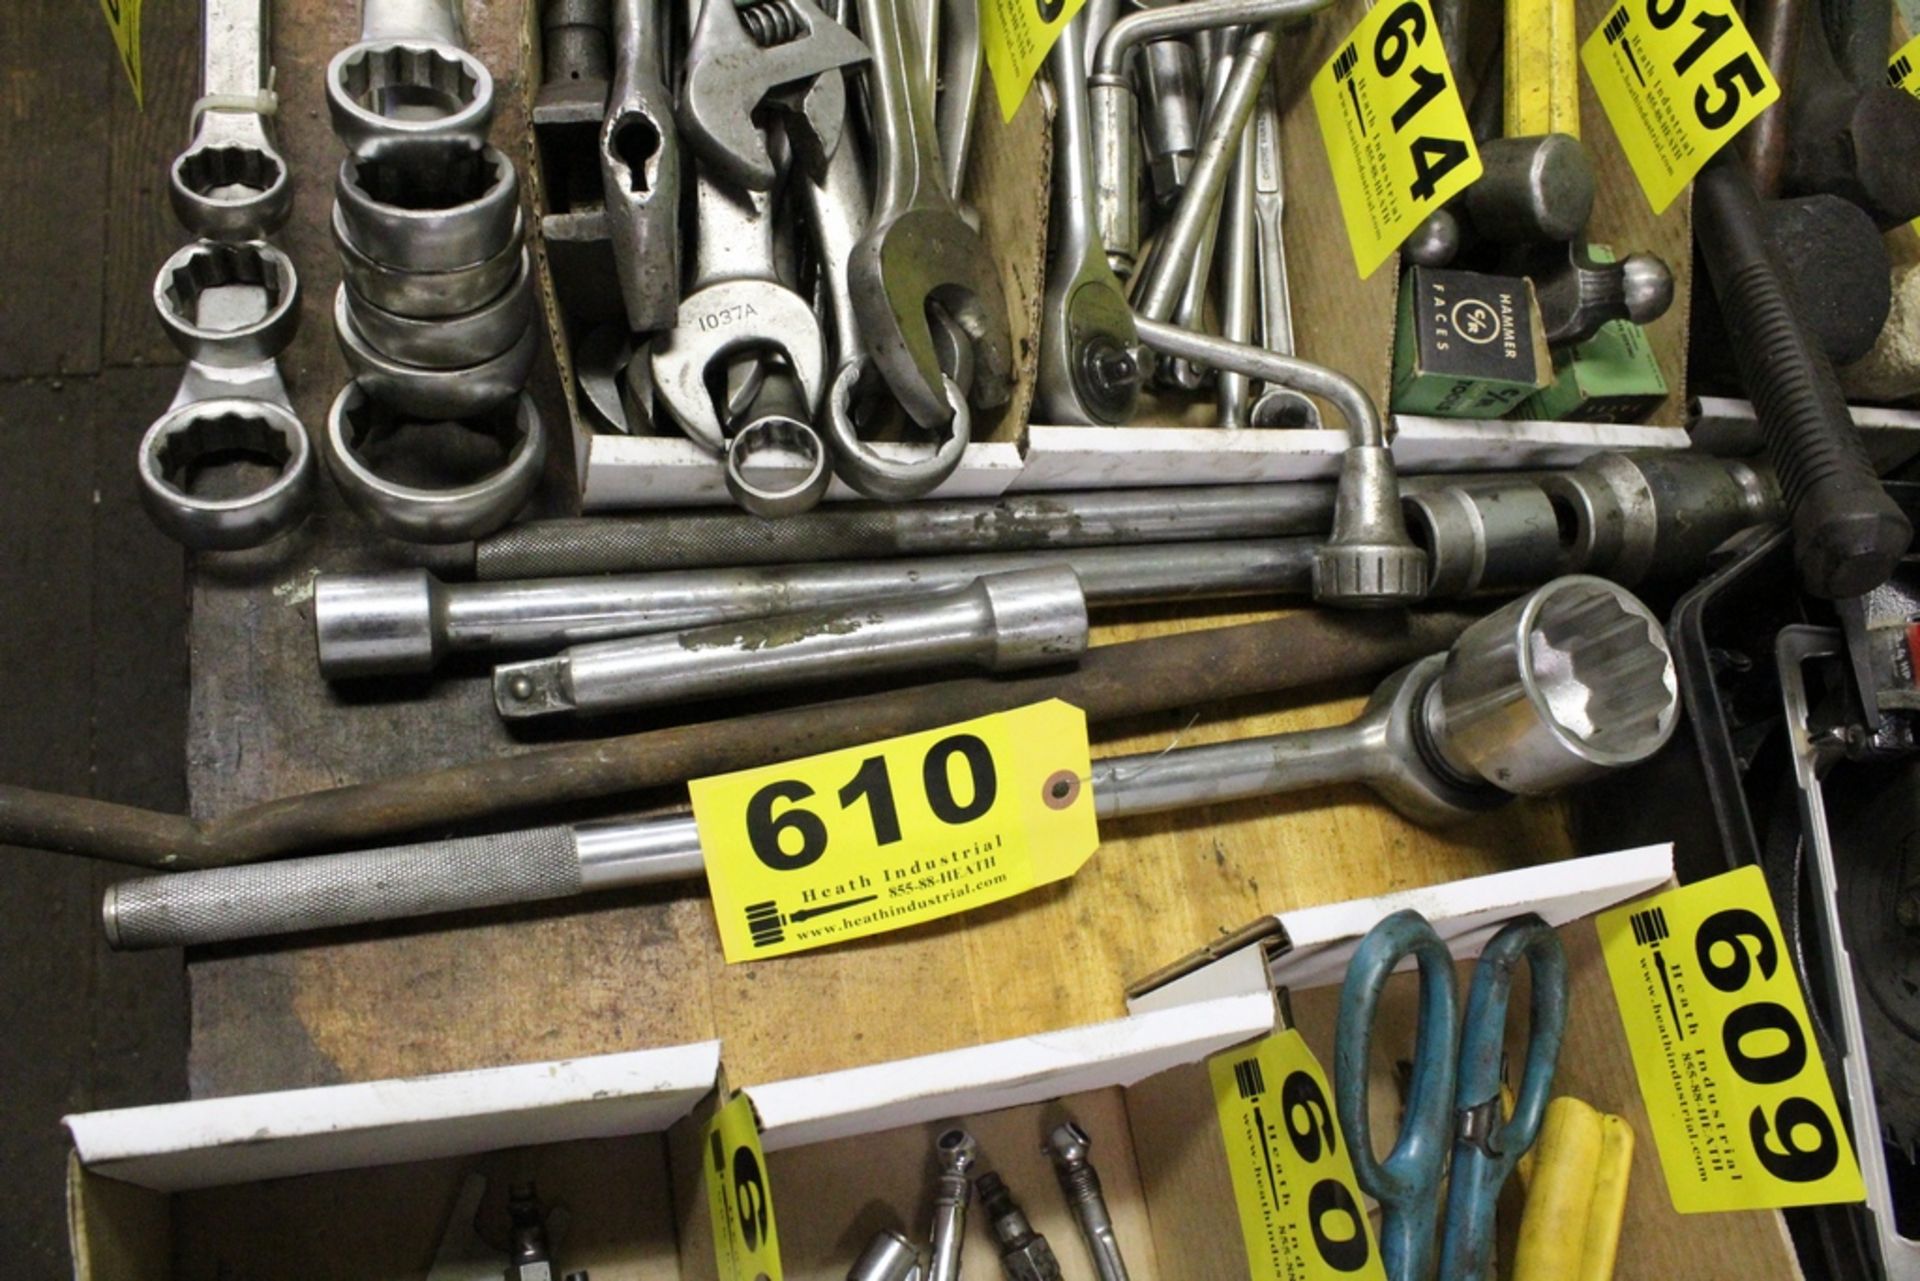 ASSORTED LARGE SOCKETS, RACHET WRENCHES AND ACCESSORIES